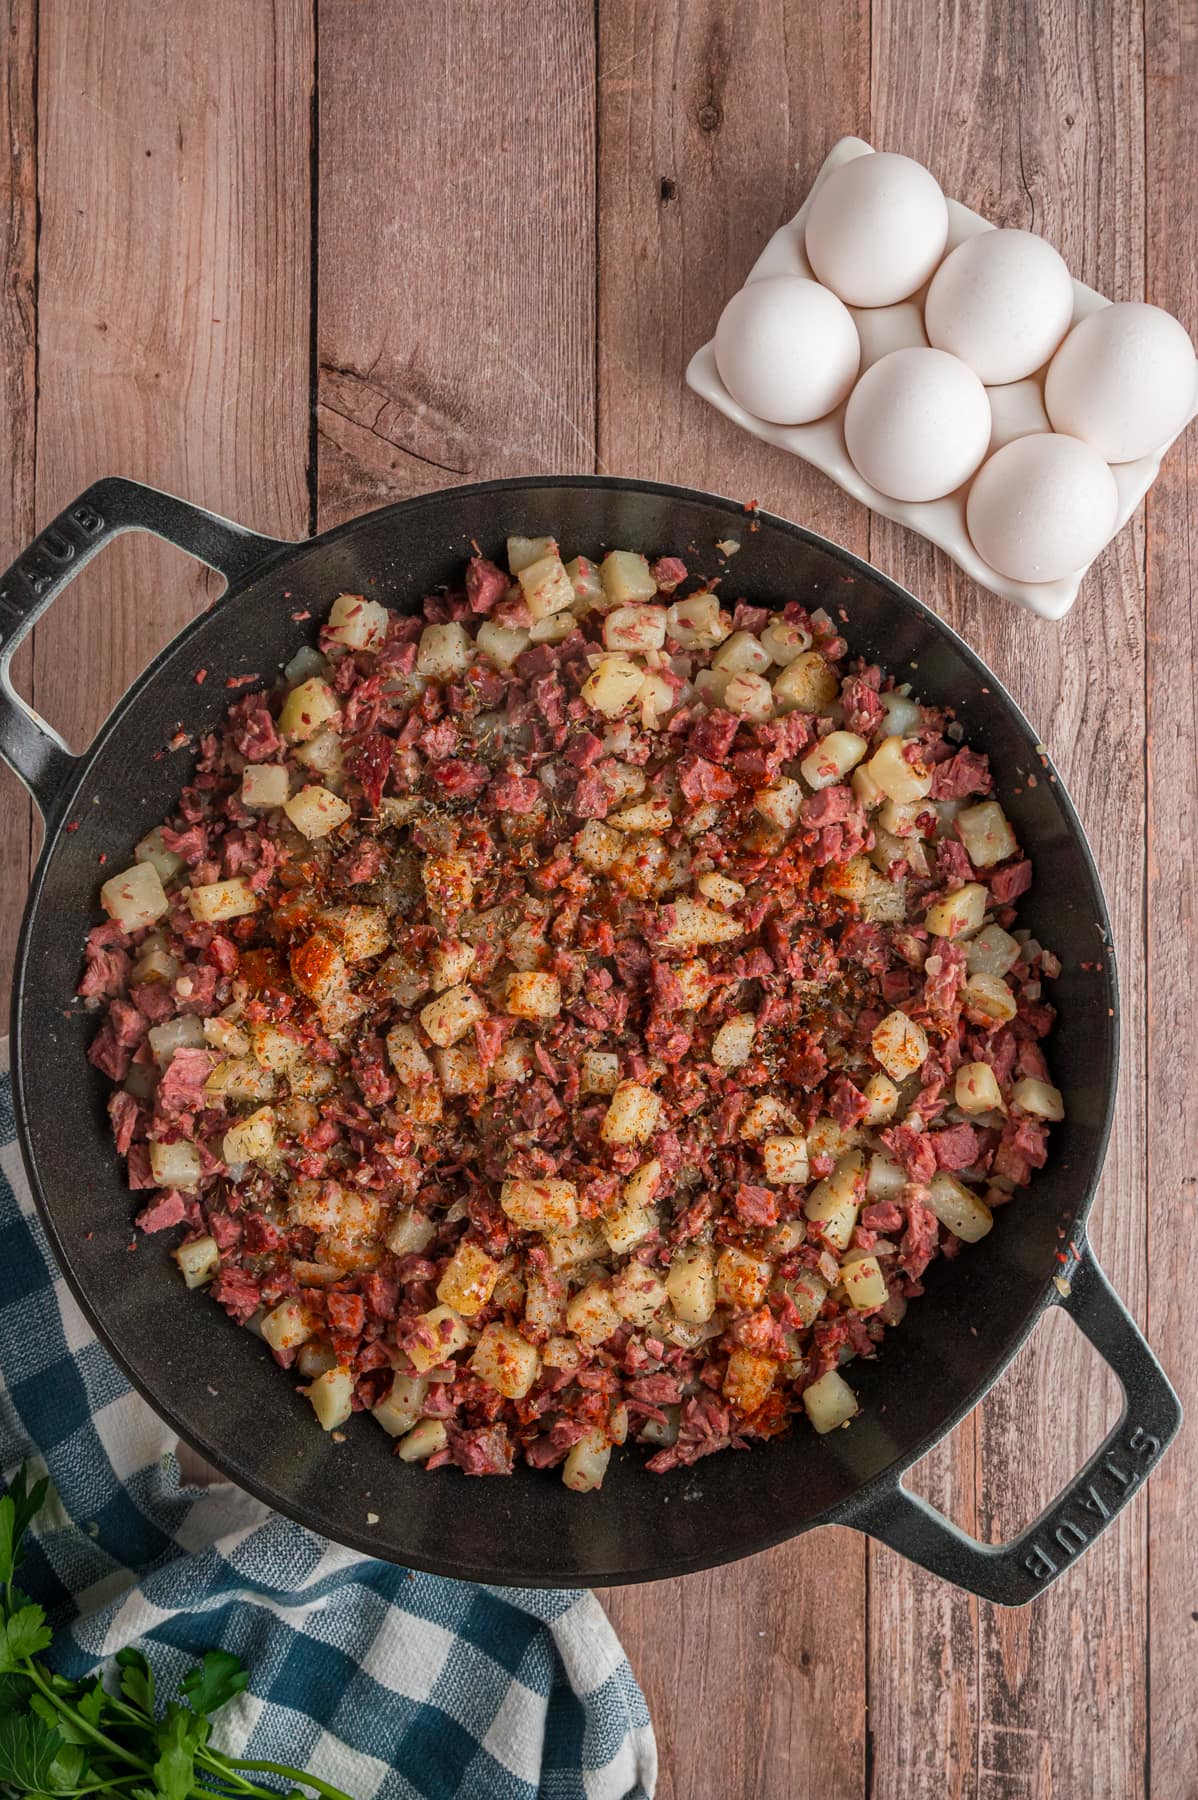 Diced potatoes and corned beef browned in a cast iron skillet.